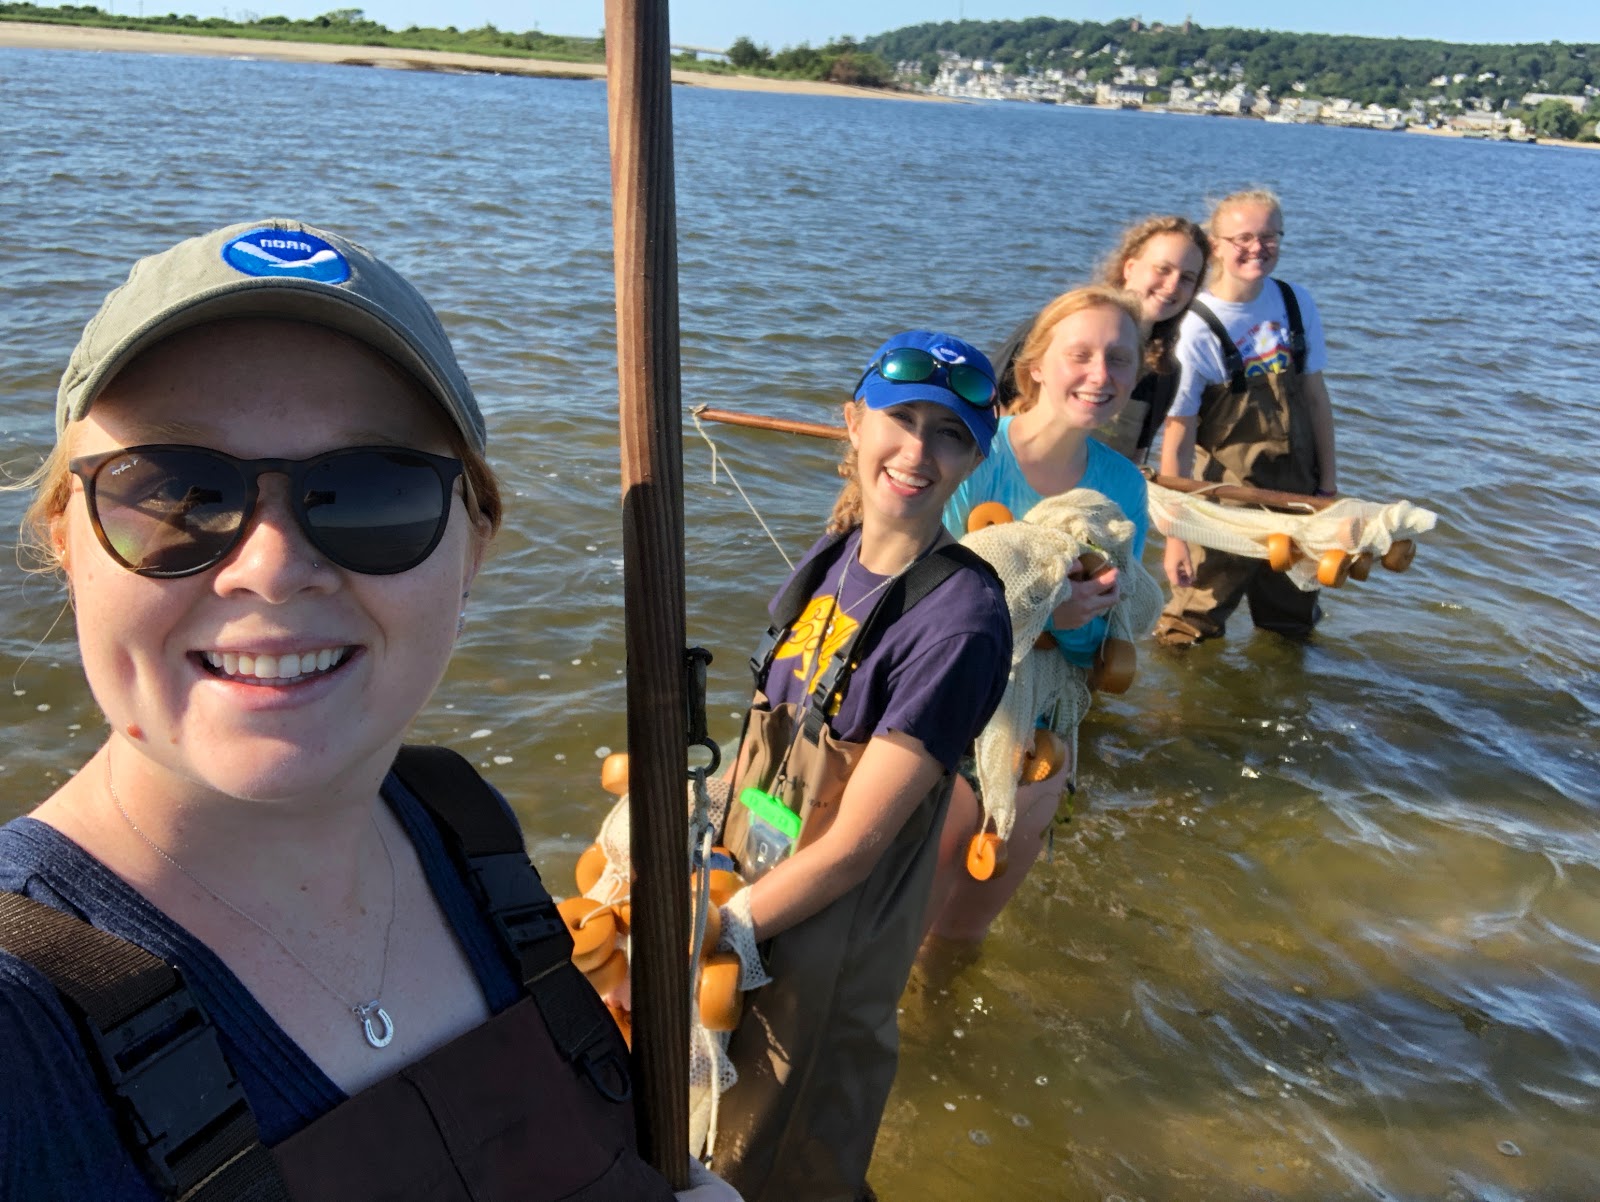 All interns on deck to pull the 100 ft. seine! Taylor Cubbage (second from left) helps pull the seine during her Hollings Scholar internship along Sandy Hook's beaches in New Jersey. She completed her internship with the Sandy Hook National Recreational Area.